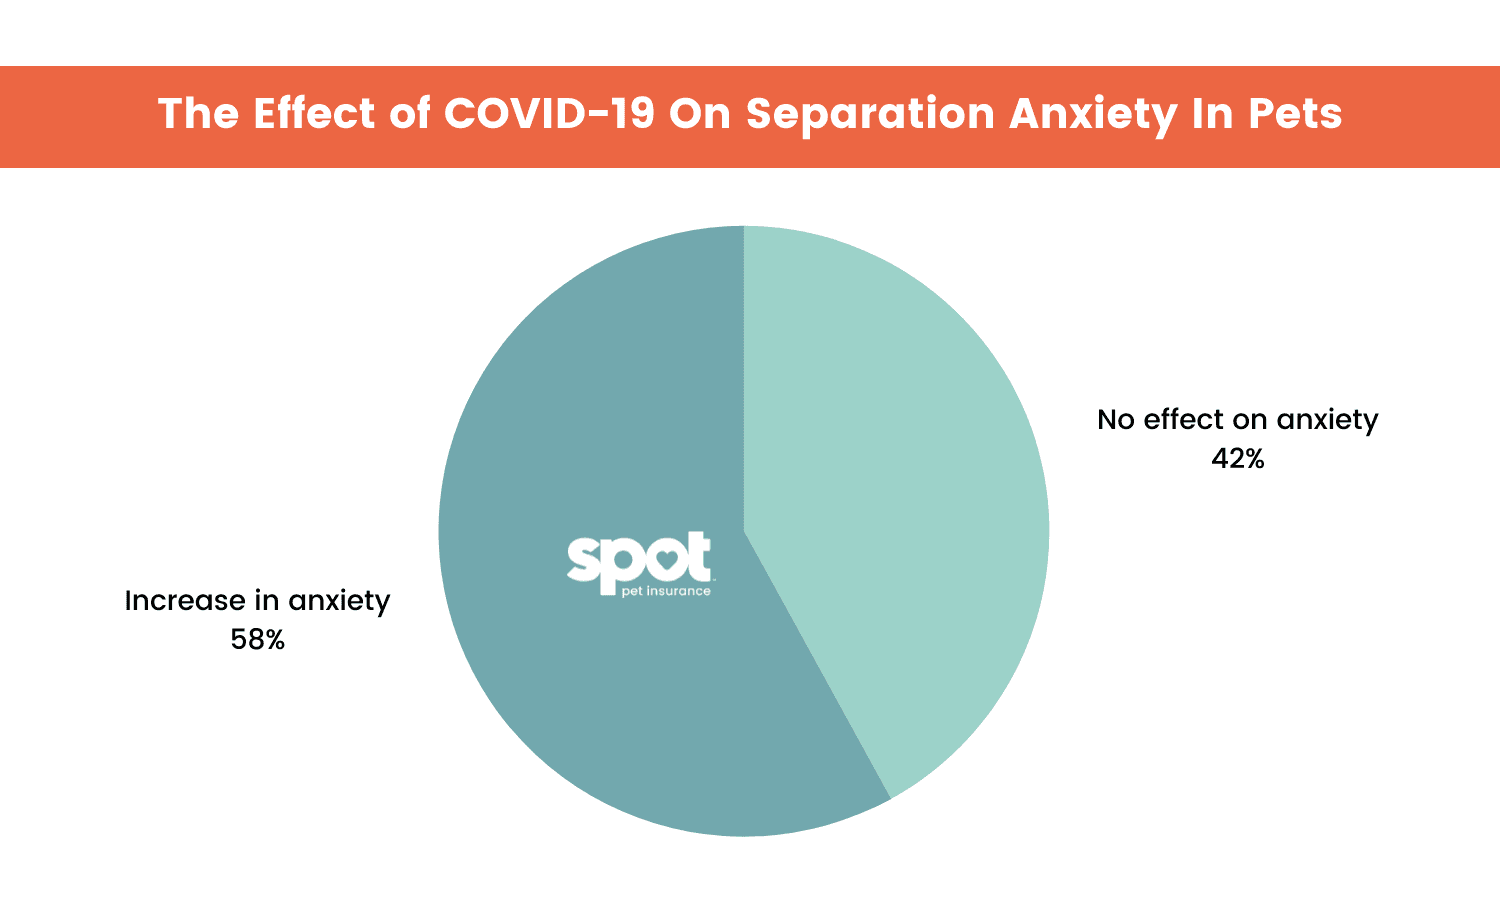 A pie chart titled "The Effect of COVID-19 On Separation Anxiety In Pets" shows a 58% increase in anxiety.